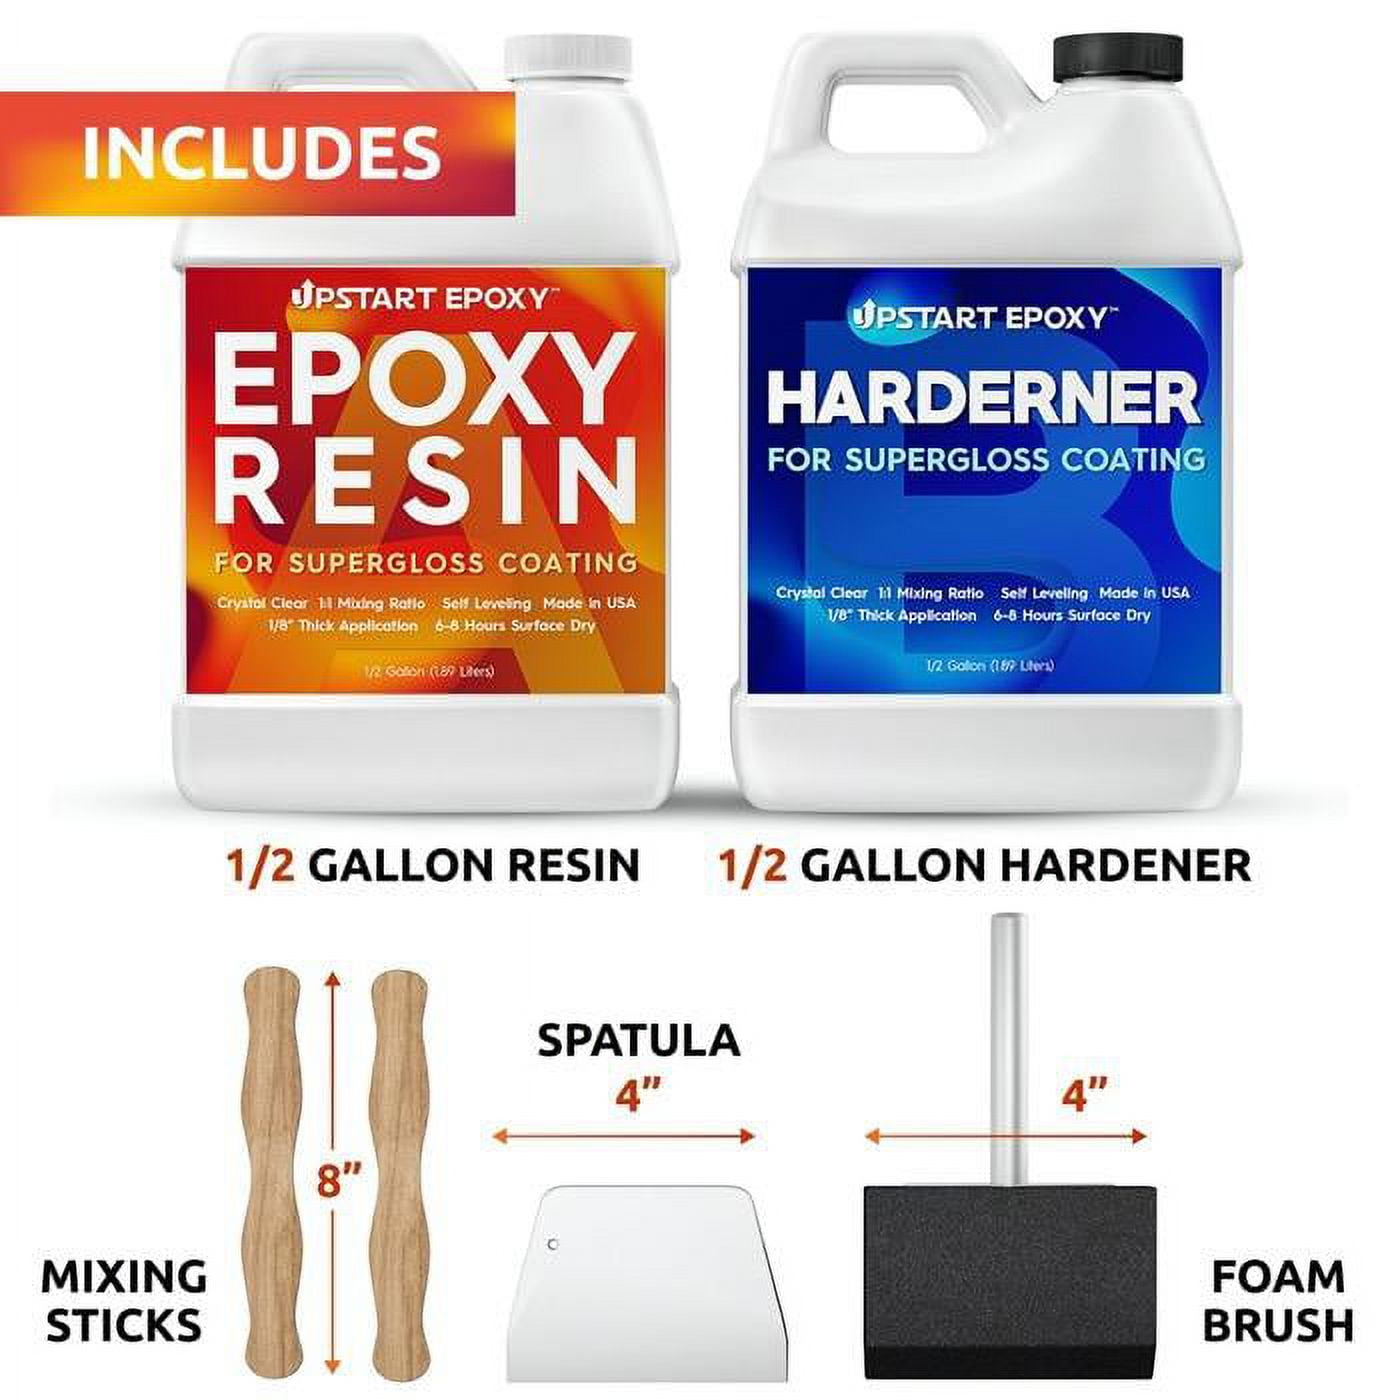 The Epoxt Resin Store - Tumbler Coating Epoxy Resin, Super Gloss Shine, Fast Cure, Self LEVELING, Low Odor, Easy Mixing (1-1), UV Stable, 2 Part 1 Gal